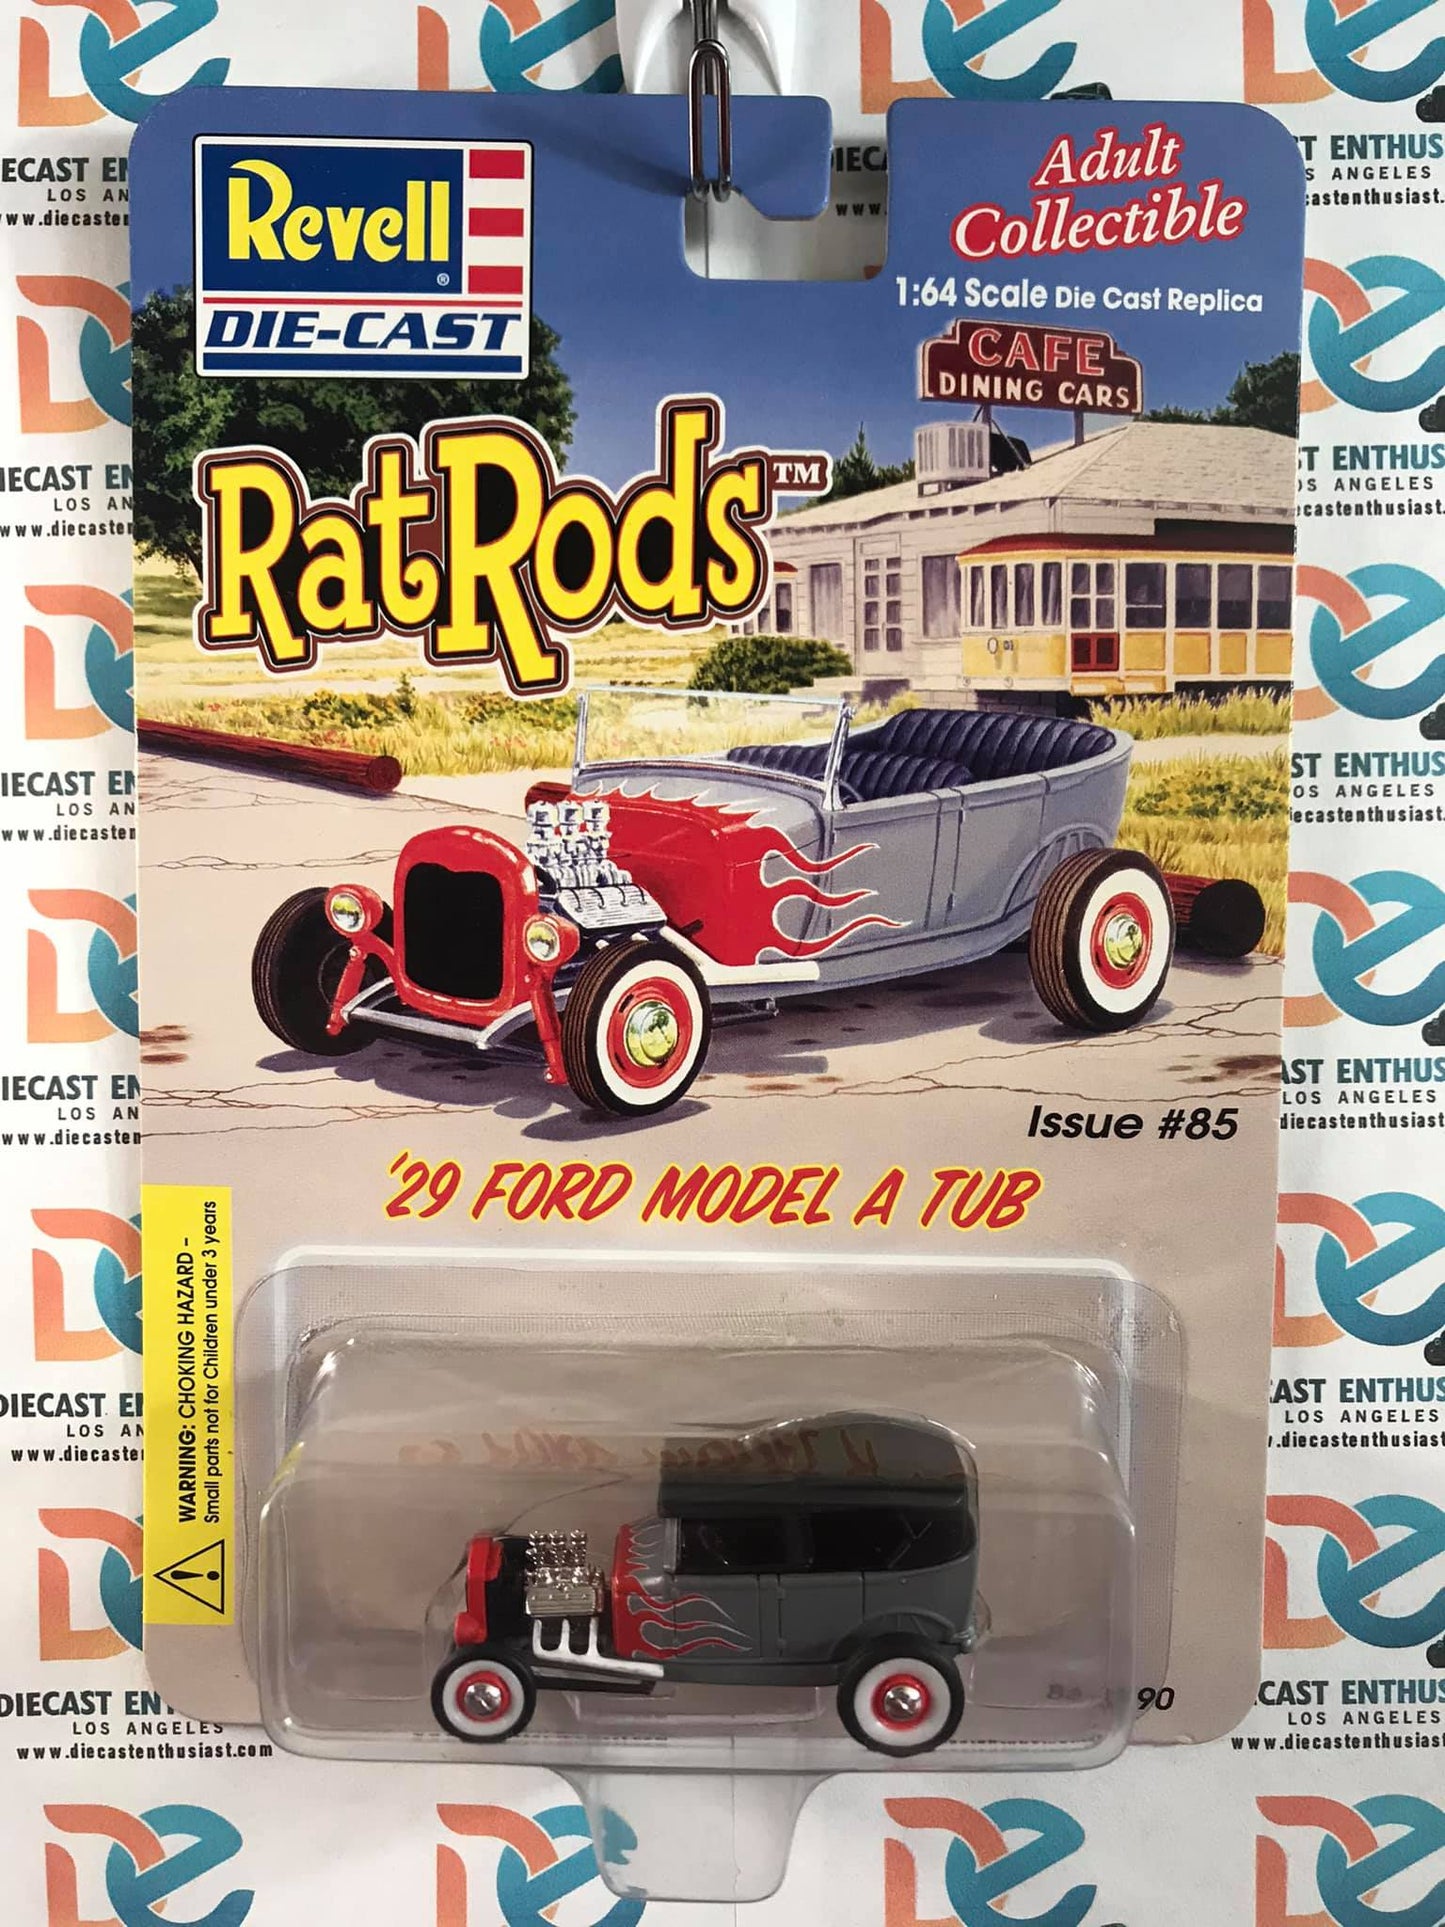 Revell Rat Rods 29 Ford Model A Tub Grey 1:64